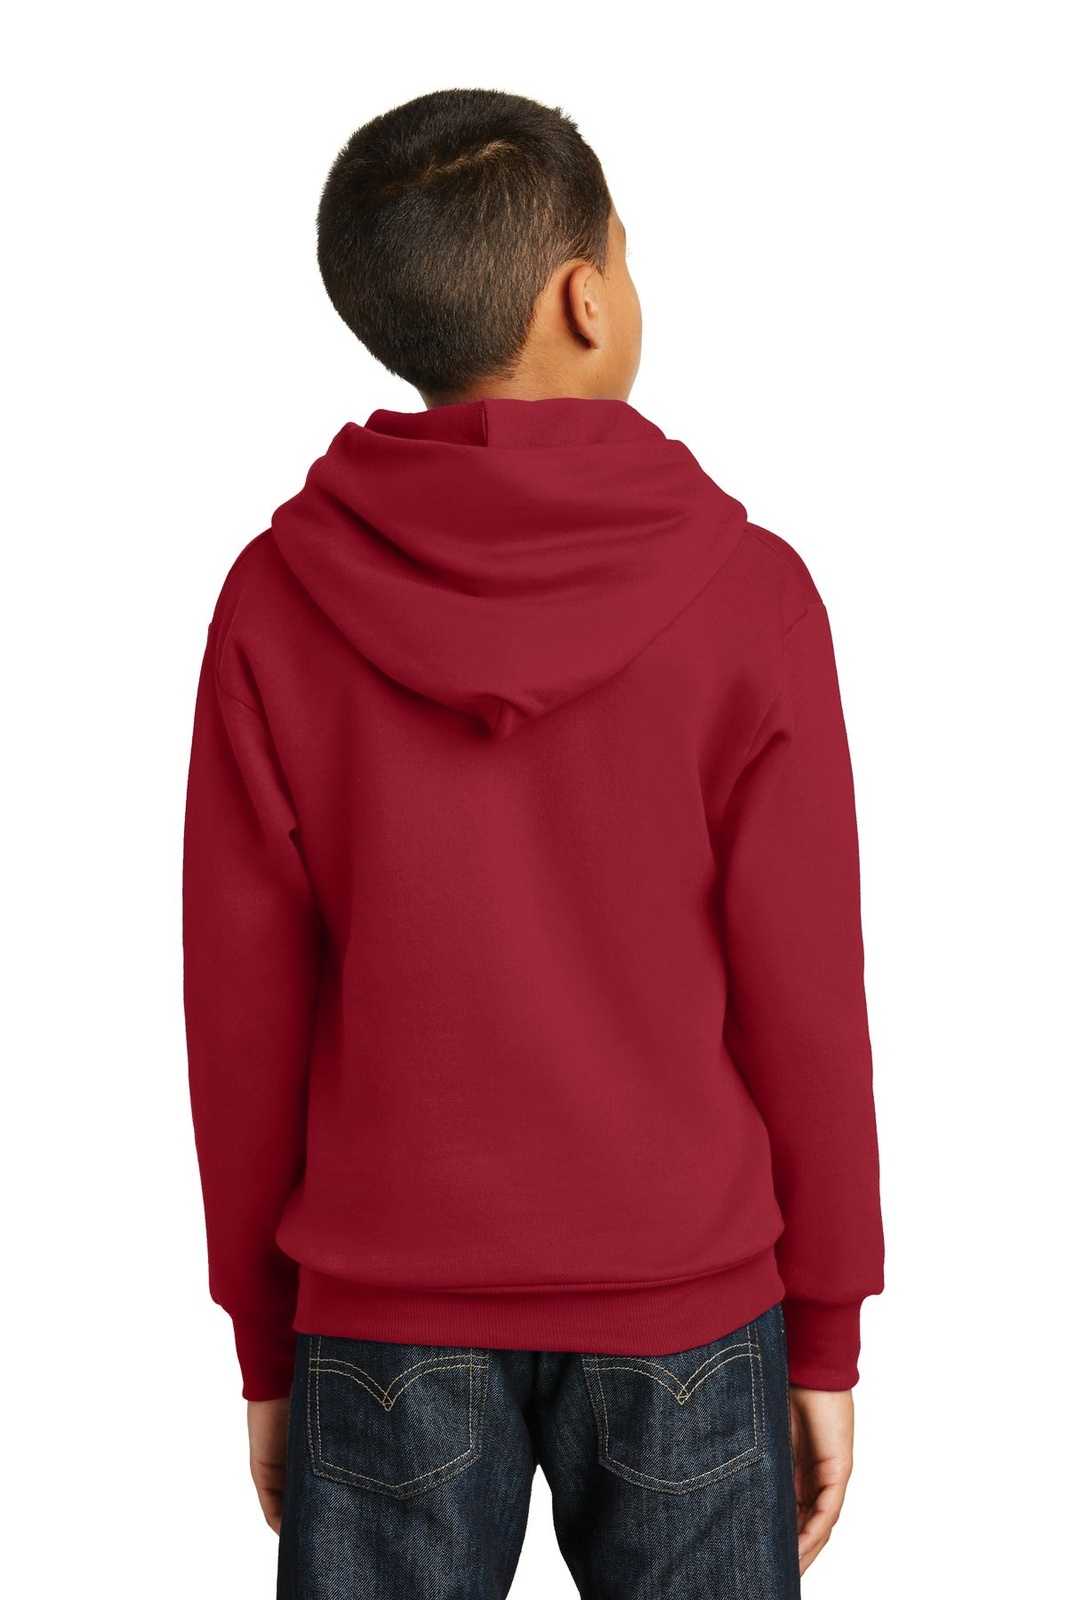 Hanes P470 Youth Ecosmart Pullover Hooded Sweatshirt - Deep Red - HIT a Double - 1